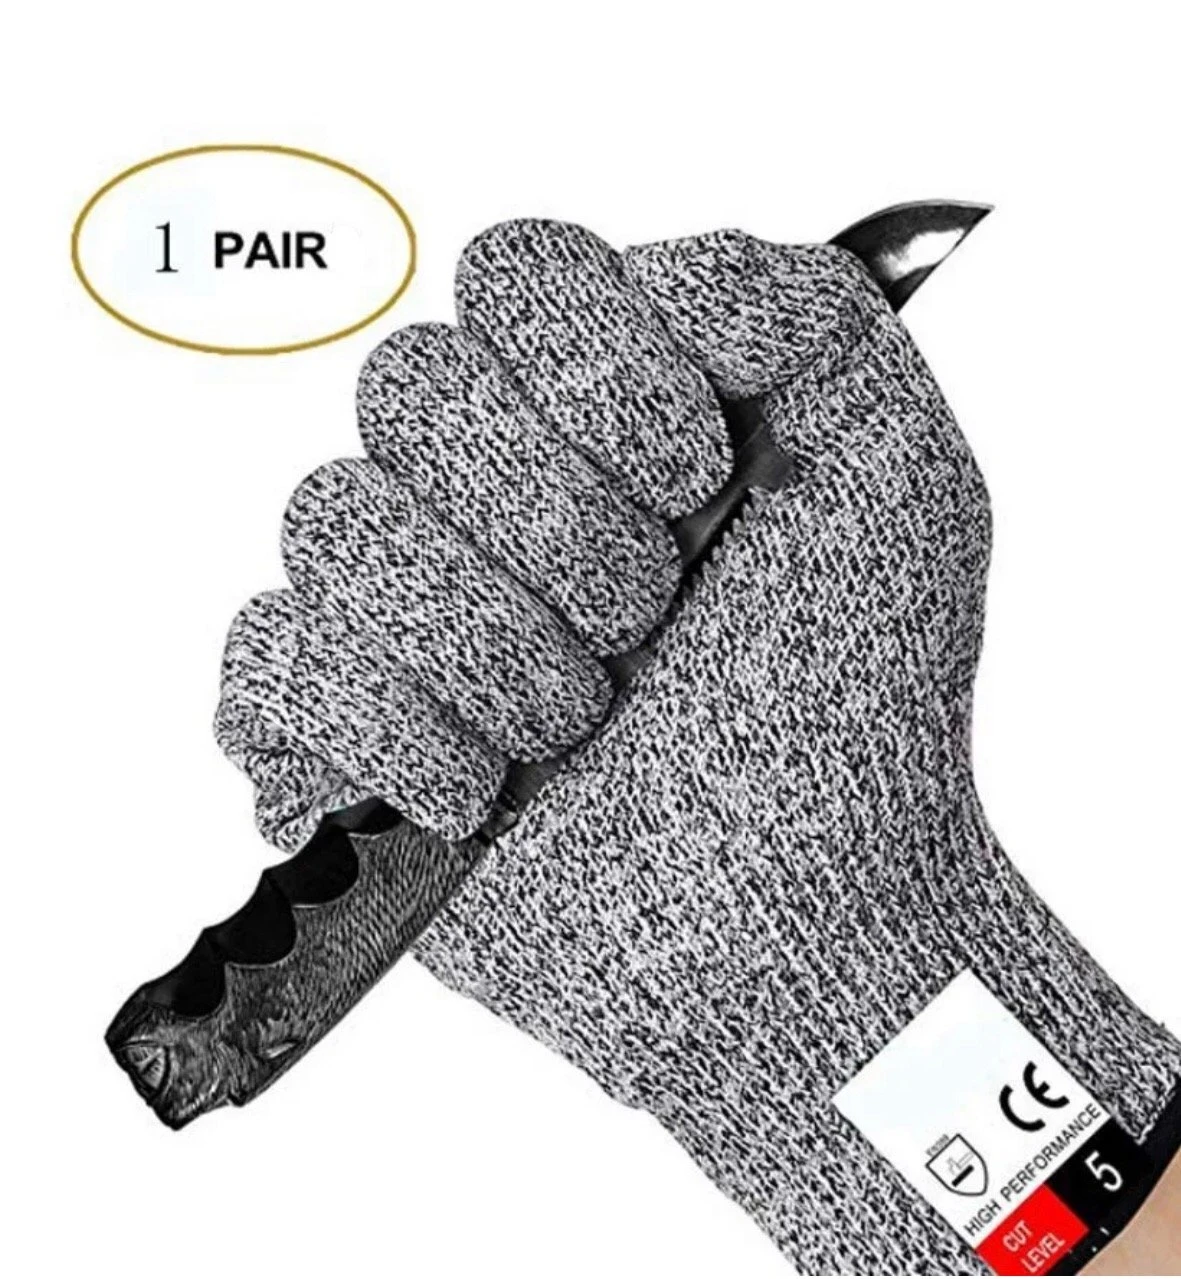 Cut Resistant Gloves - Highest Level of Protection